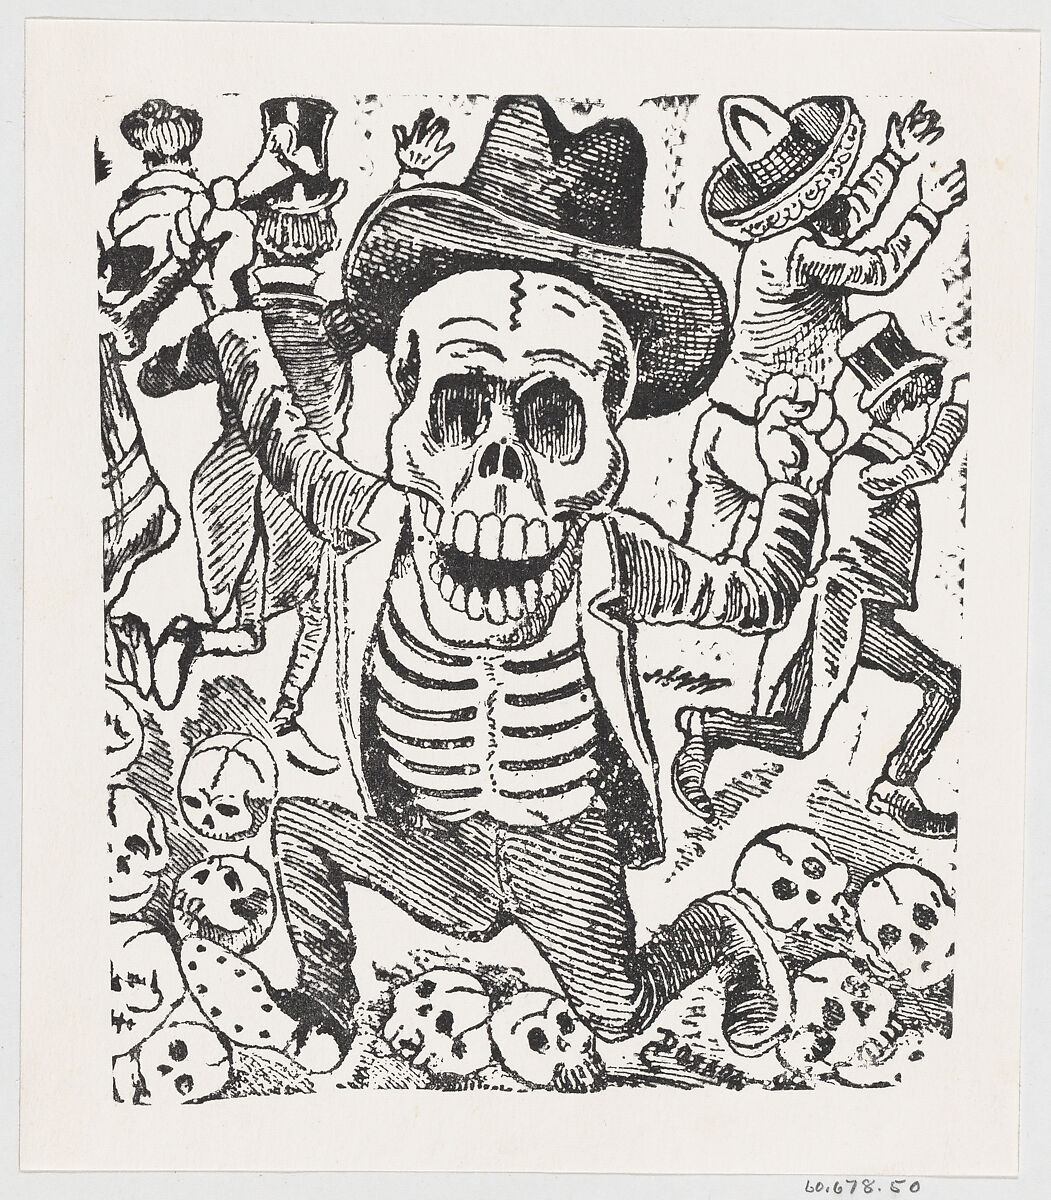 A skeleton holding a bone and leaping over a pile of skulls while people flee, from a broadside entitled 'Las bravisimas calaveras Guatemaltecas', José Guadalupe Posada (Mexican, 1851–1913), Zincograph 